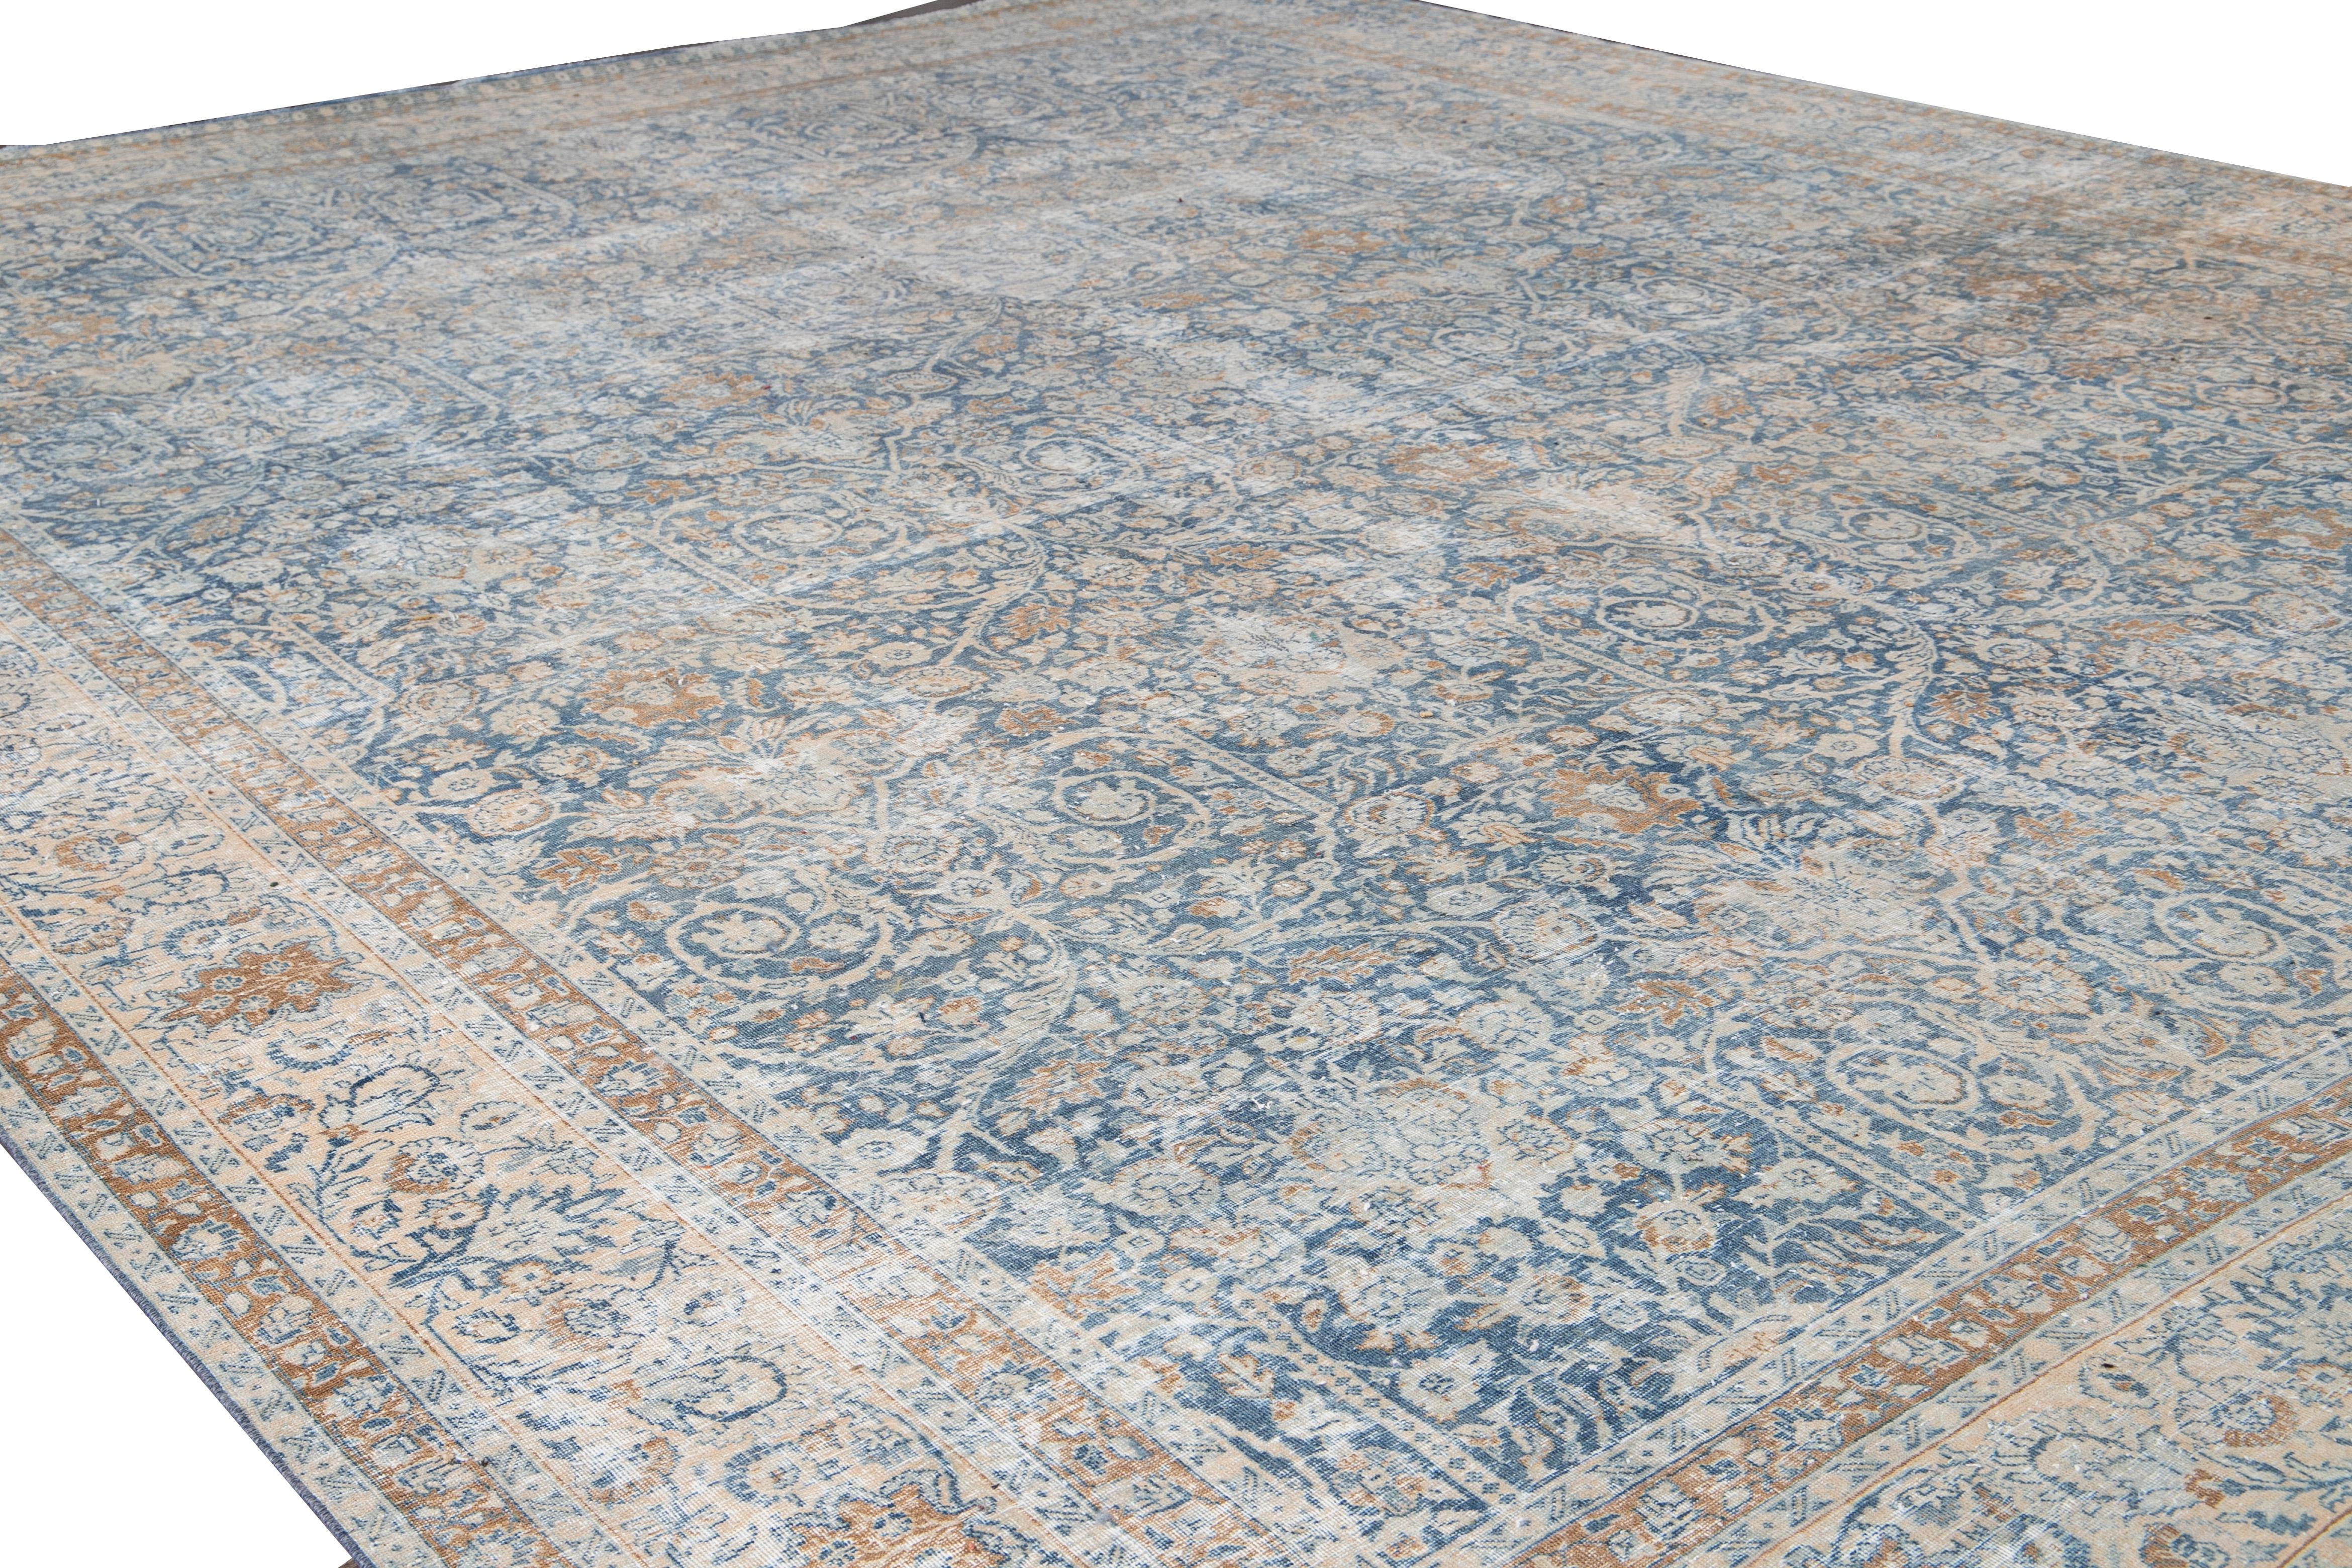 Early 20th Century Antique Shabby Chic Blue Tabriz Handmade Oversize Wool Rug For Sale